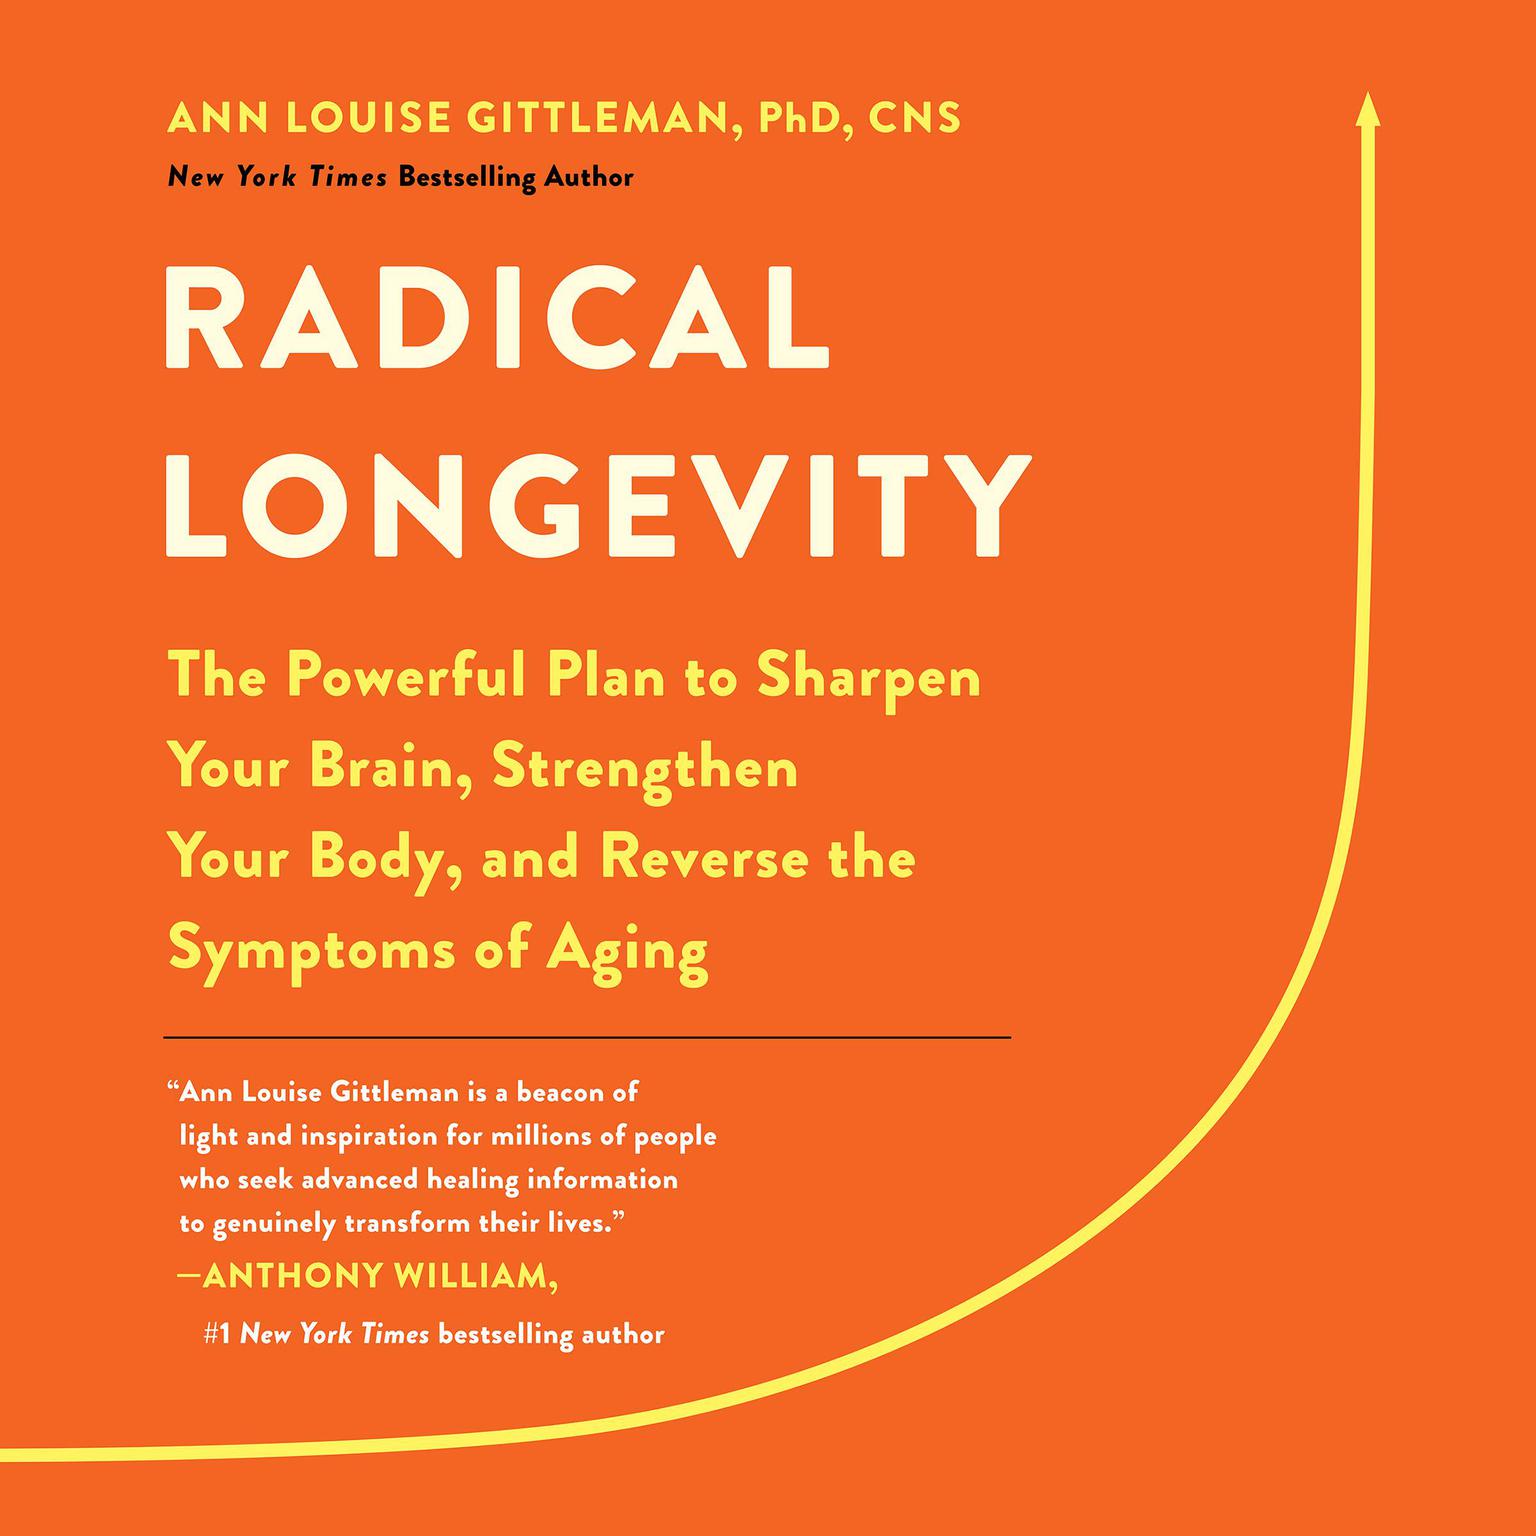 Radical Longevity: The Powerful Plan to Sharpen Your Brain, Strengthen Your Body, and Reverse the Symptoms of Aging Audiobook, by Ann Louise Gittleman